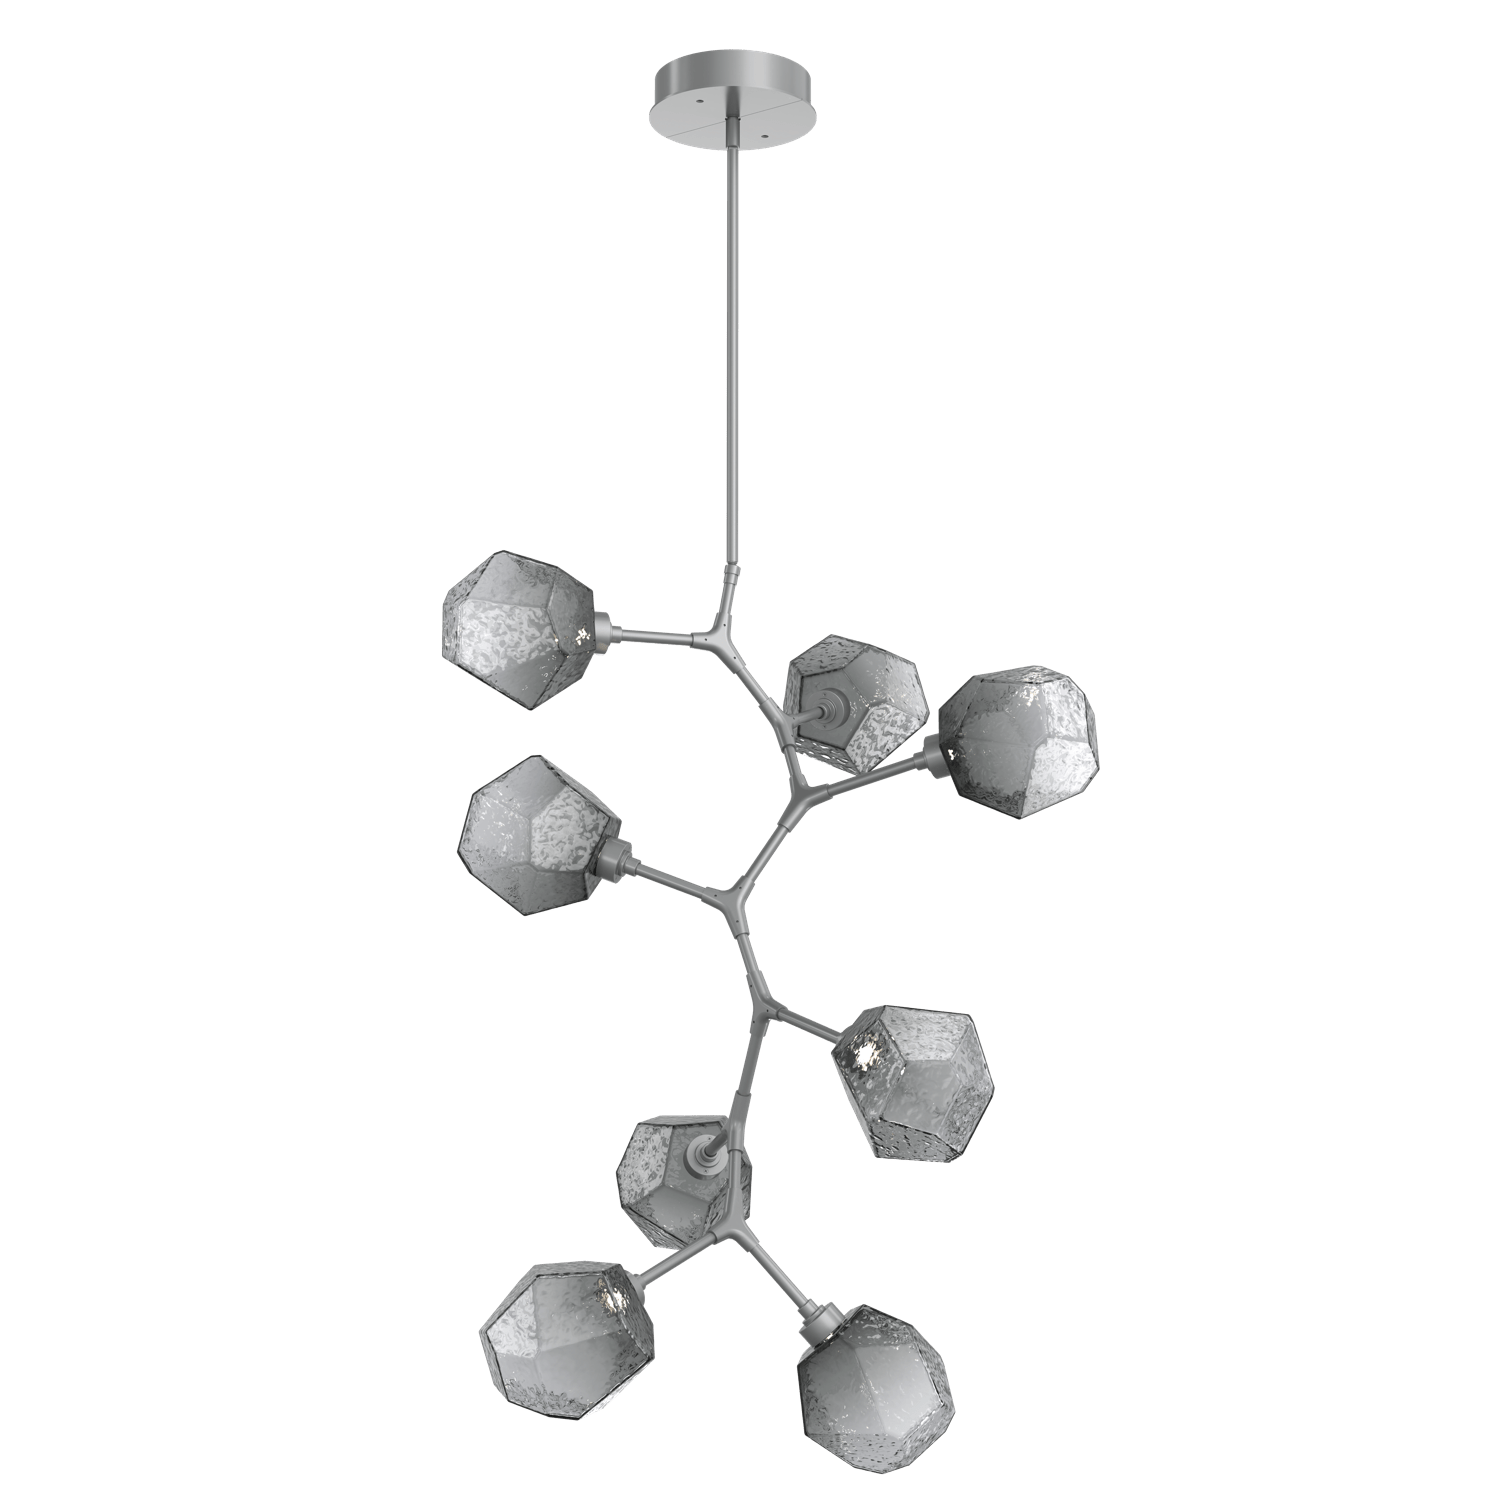 CHB0039-VB-CS-S-Hammerton-Studio-Gem-8-light-modern-vine-chandelier-with-classic-silver-finish-and-smoke-blown-glass-shades-and-LED-lamping